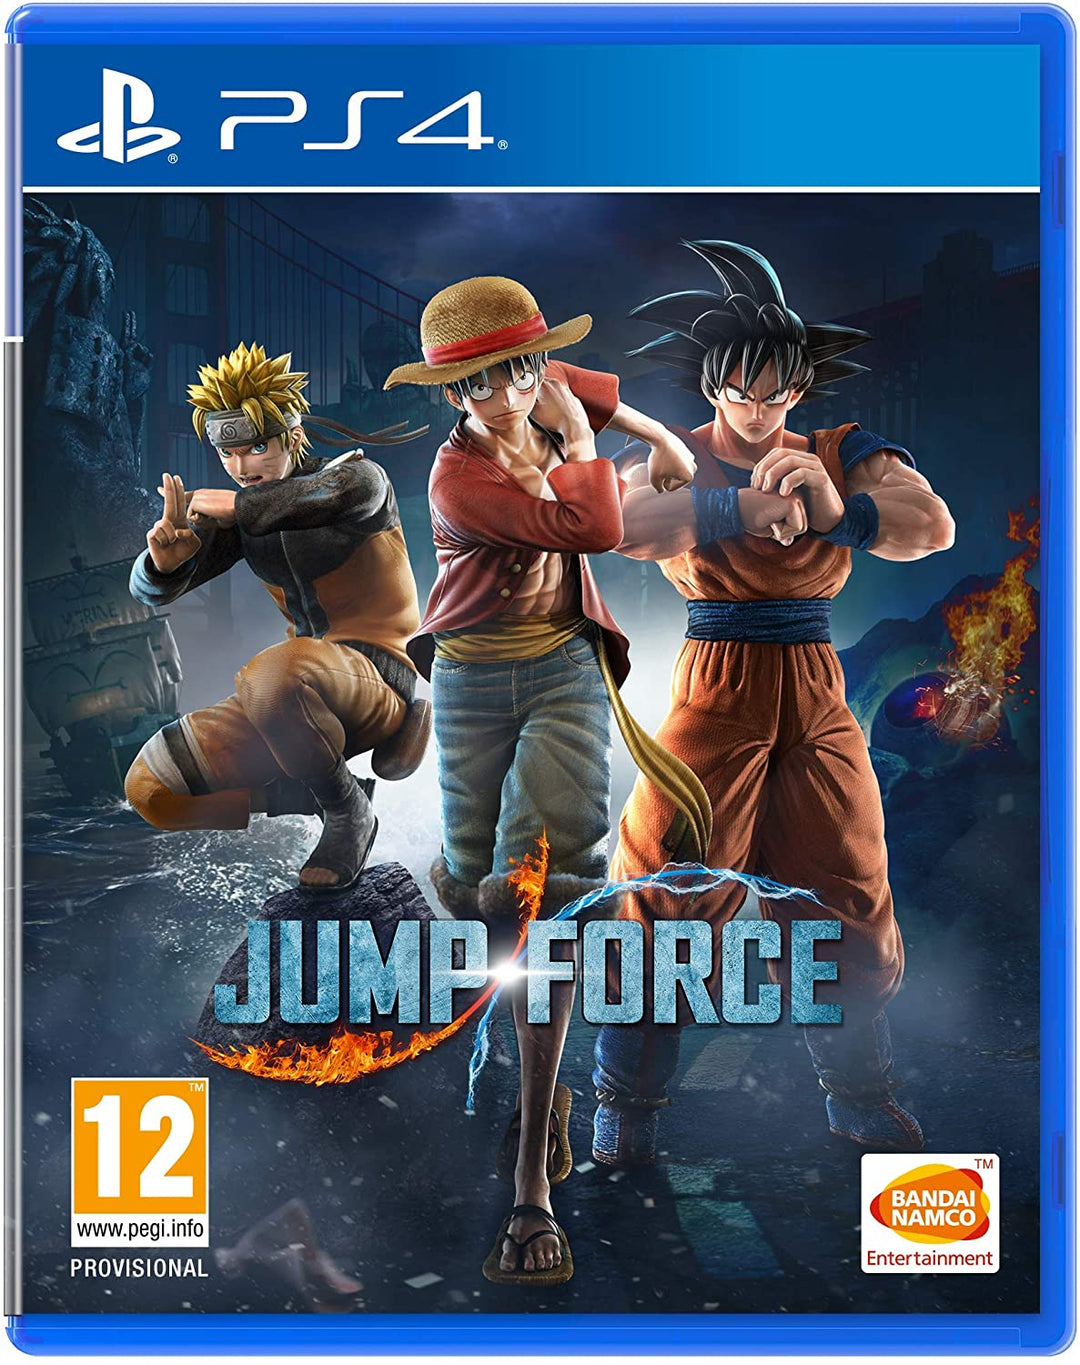 Jump Force (PS4)